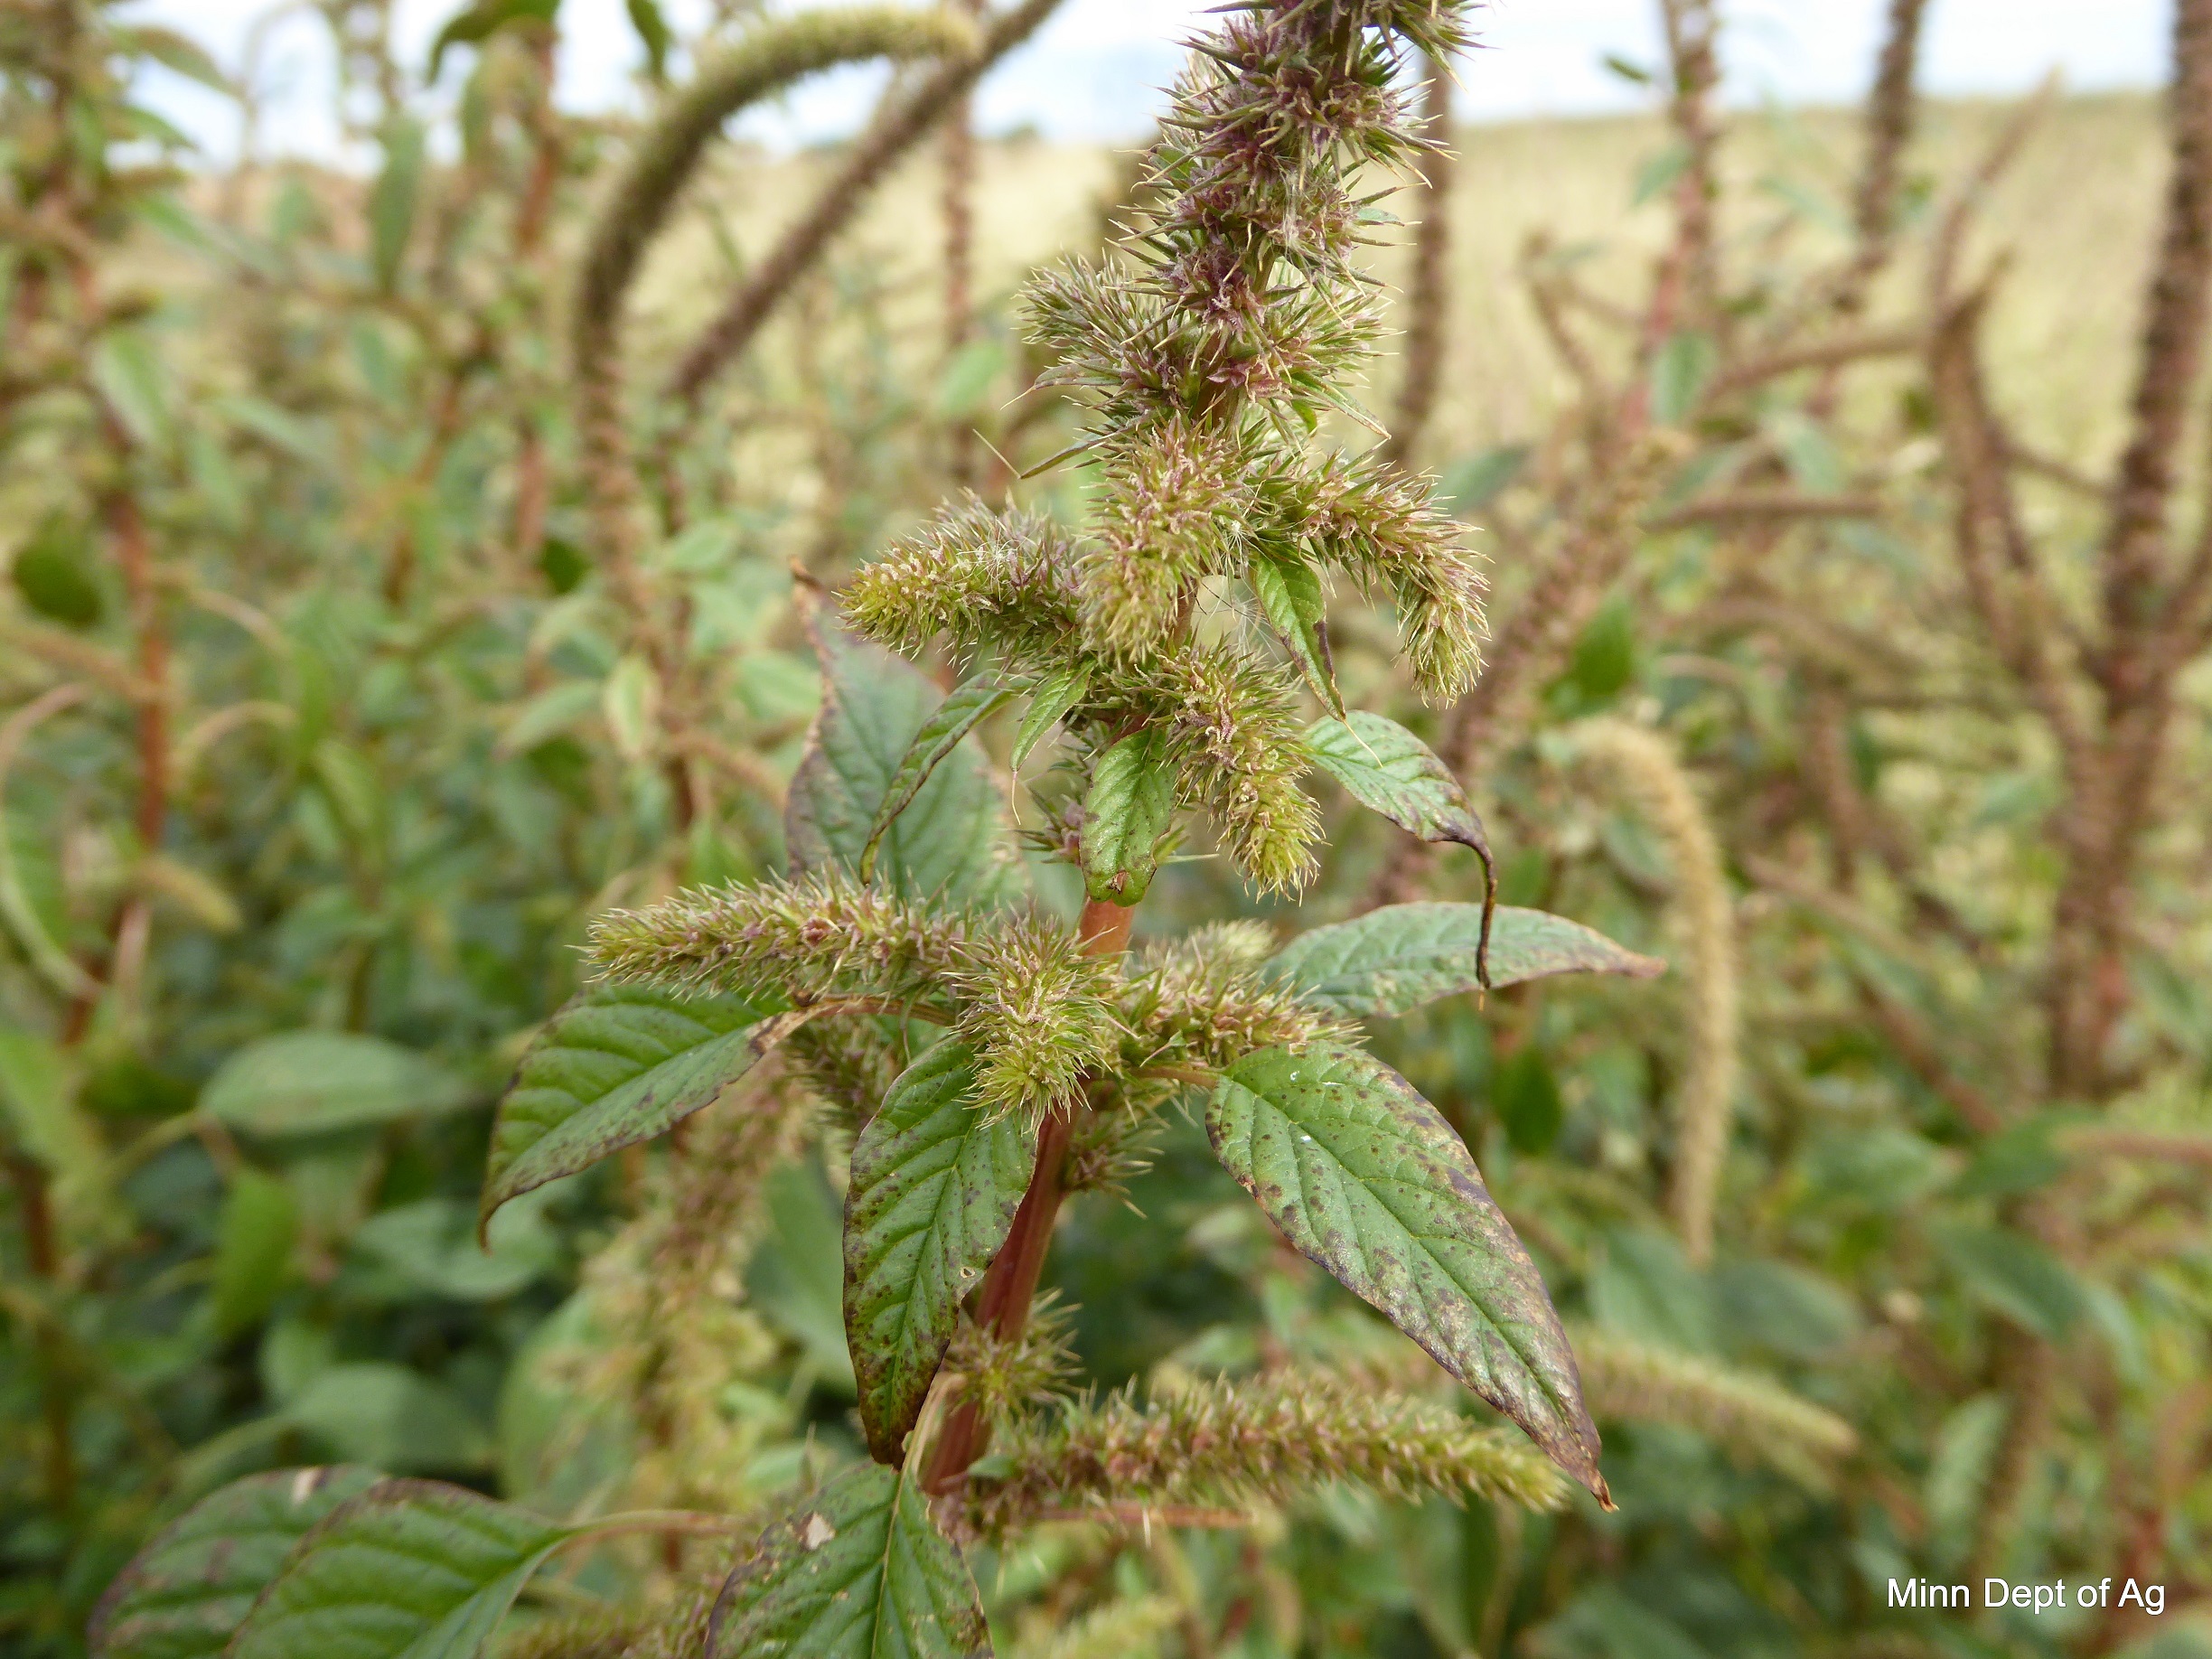 A close-up view of a seed stalk on a Palmer amaranth plant